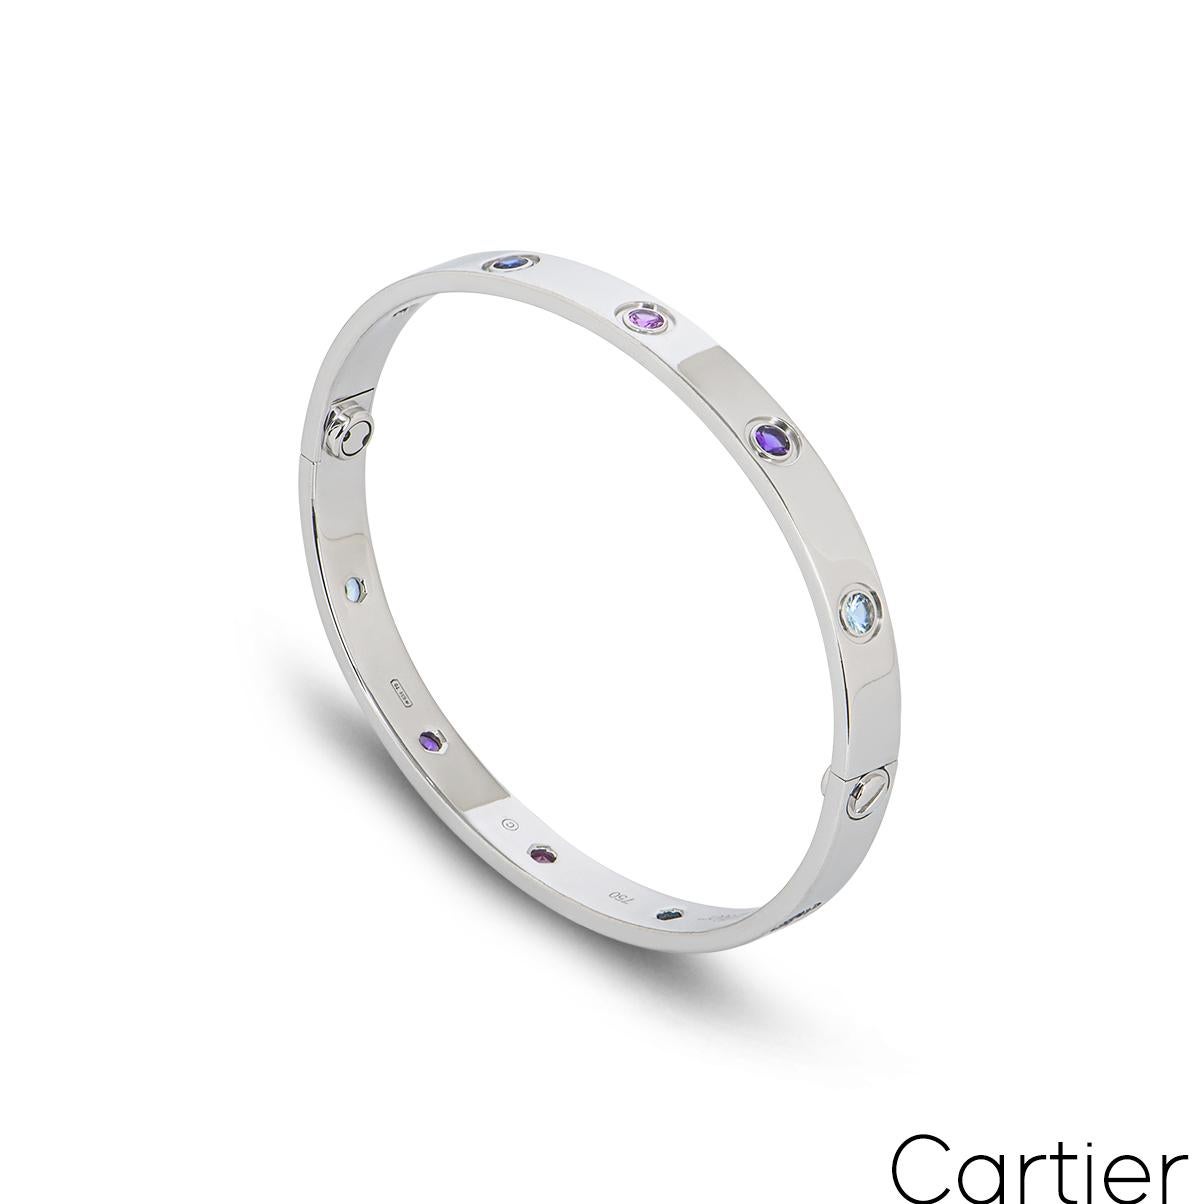 An 18k white gold coloured stones Cartier bracelet from the Love collection. The bracelet is set with 10 coloured stones throughout the centre, including purple spinel, blue and pink sapphires, amethyst and aquamarine. The bangle has the new style